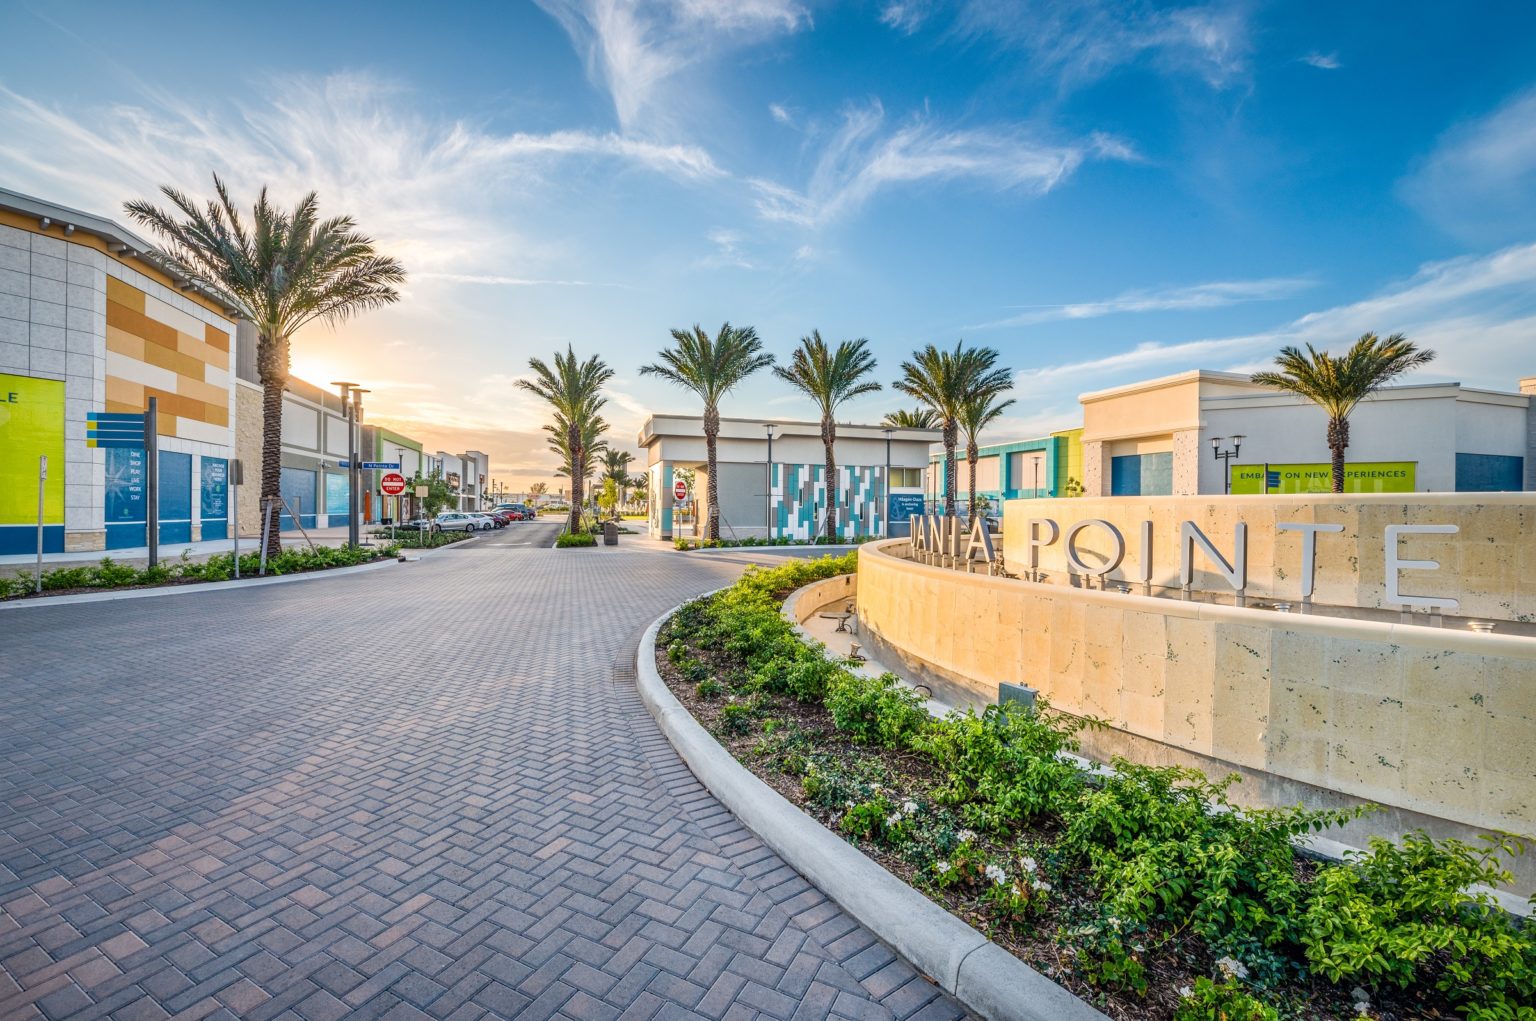 Shopping near Fort Lauderdale at Dania Pointe® shops